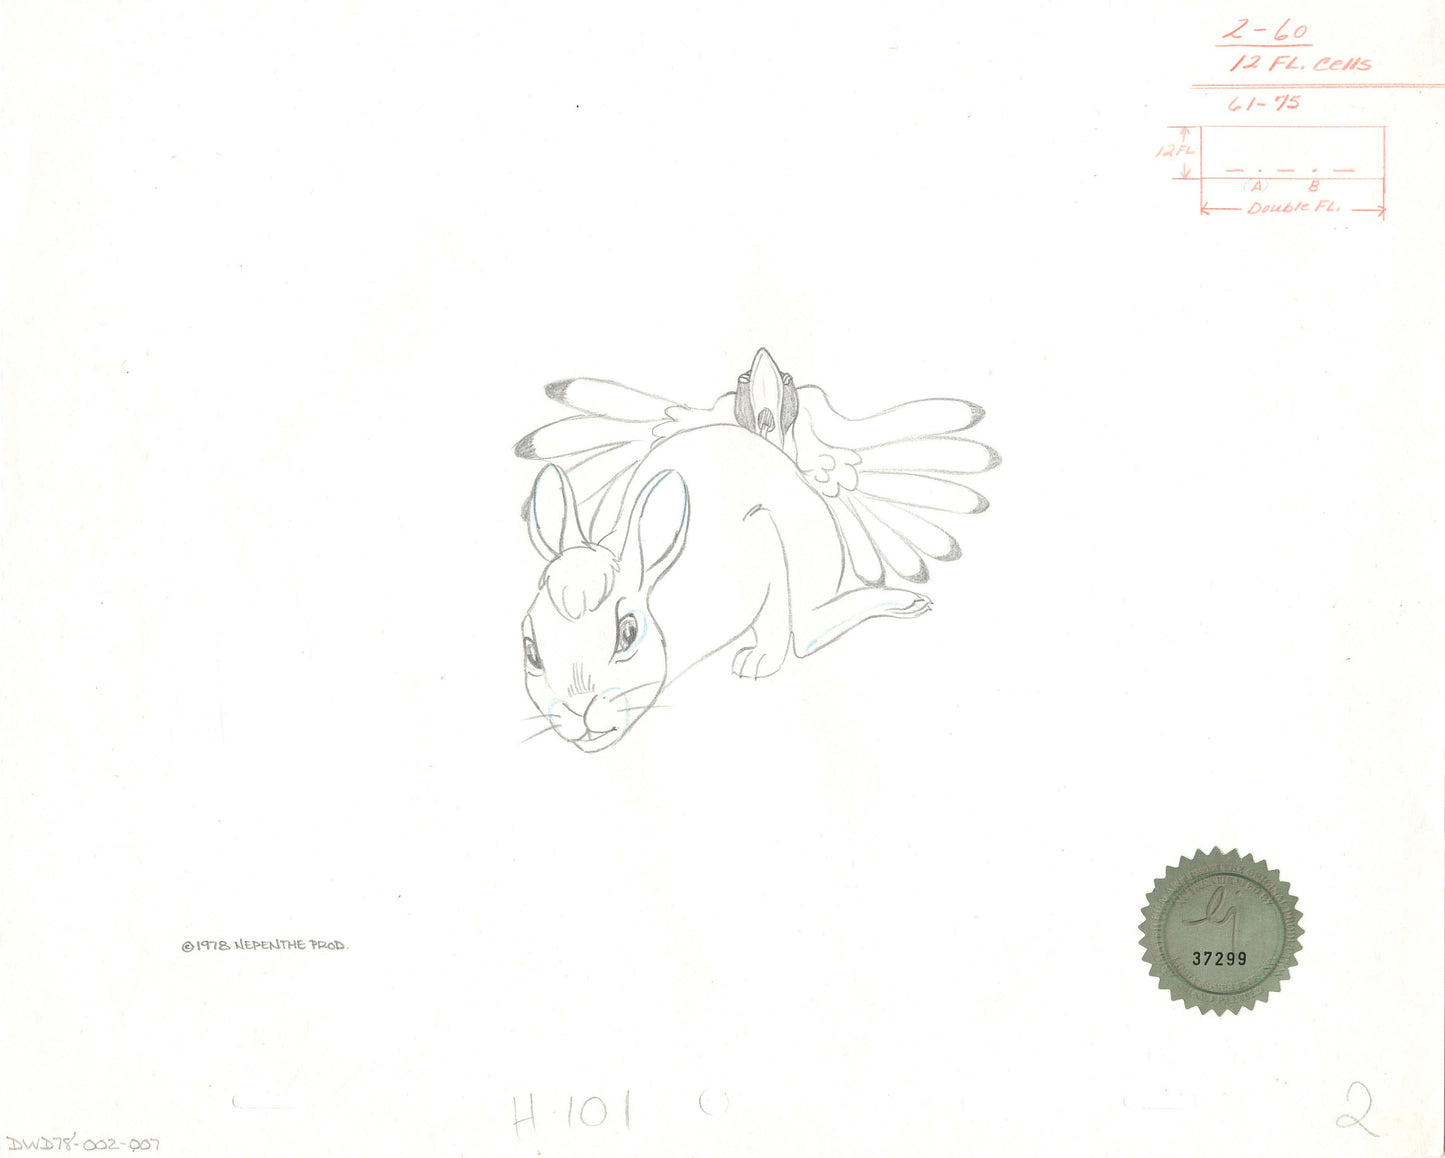 Watership Down 1978 Production Animation Cel Drawing of Bigwig and Kehaar with Linda Jones Seal and Certificate of Authenticity 002-007